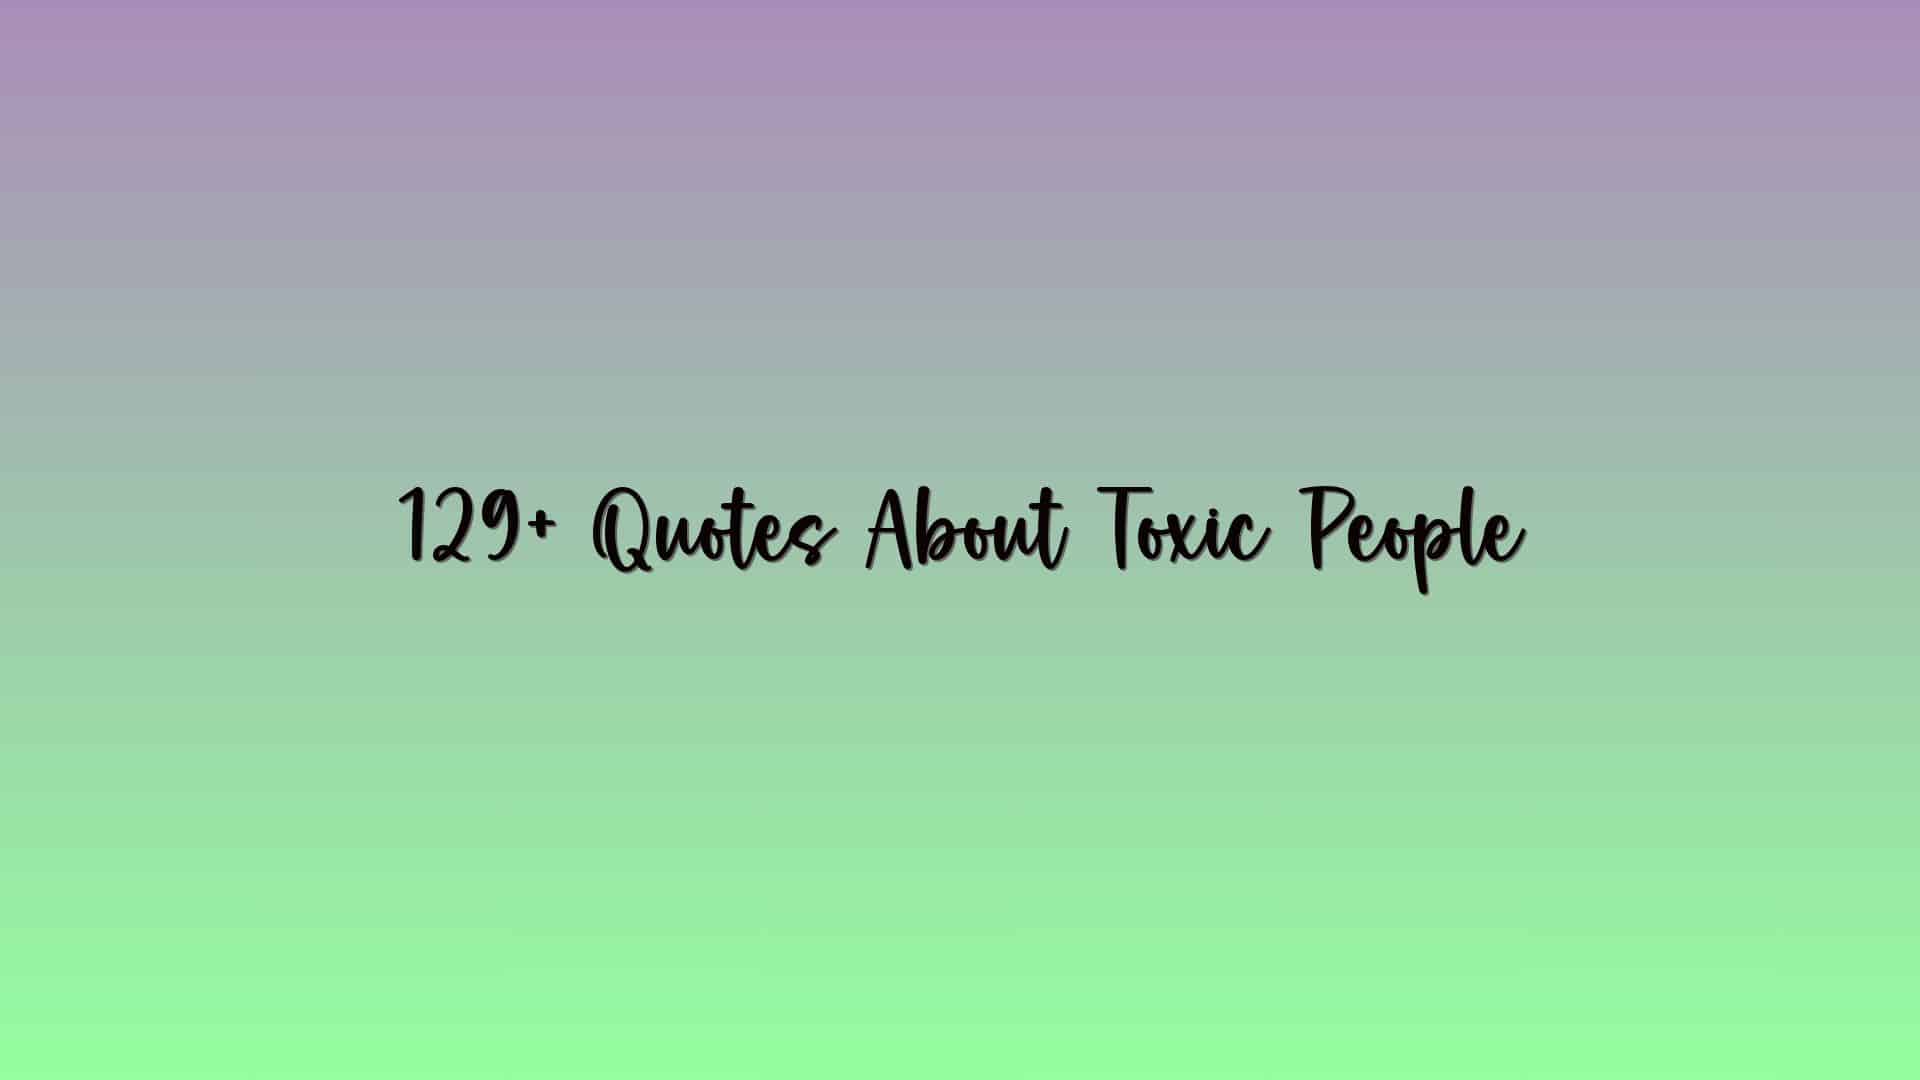 129+ Quotes About Toxic People